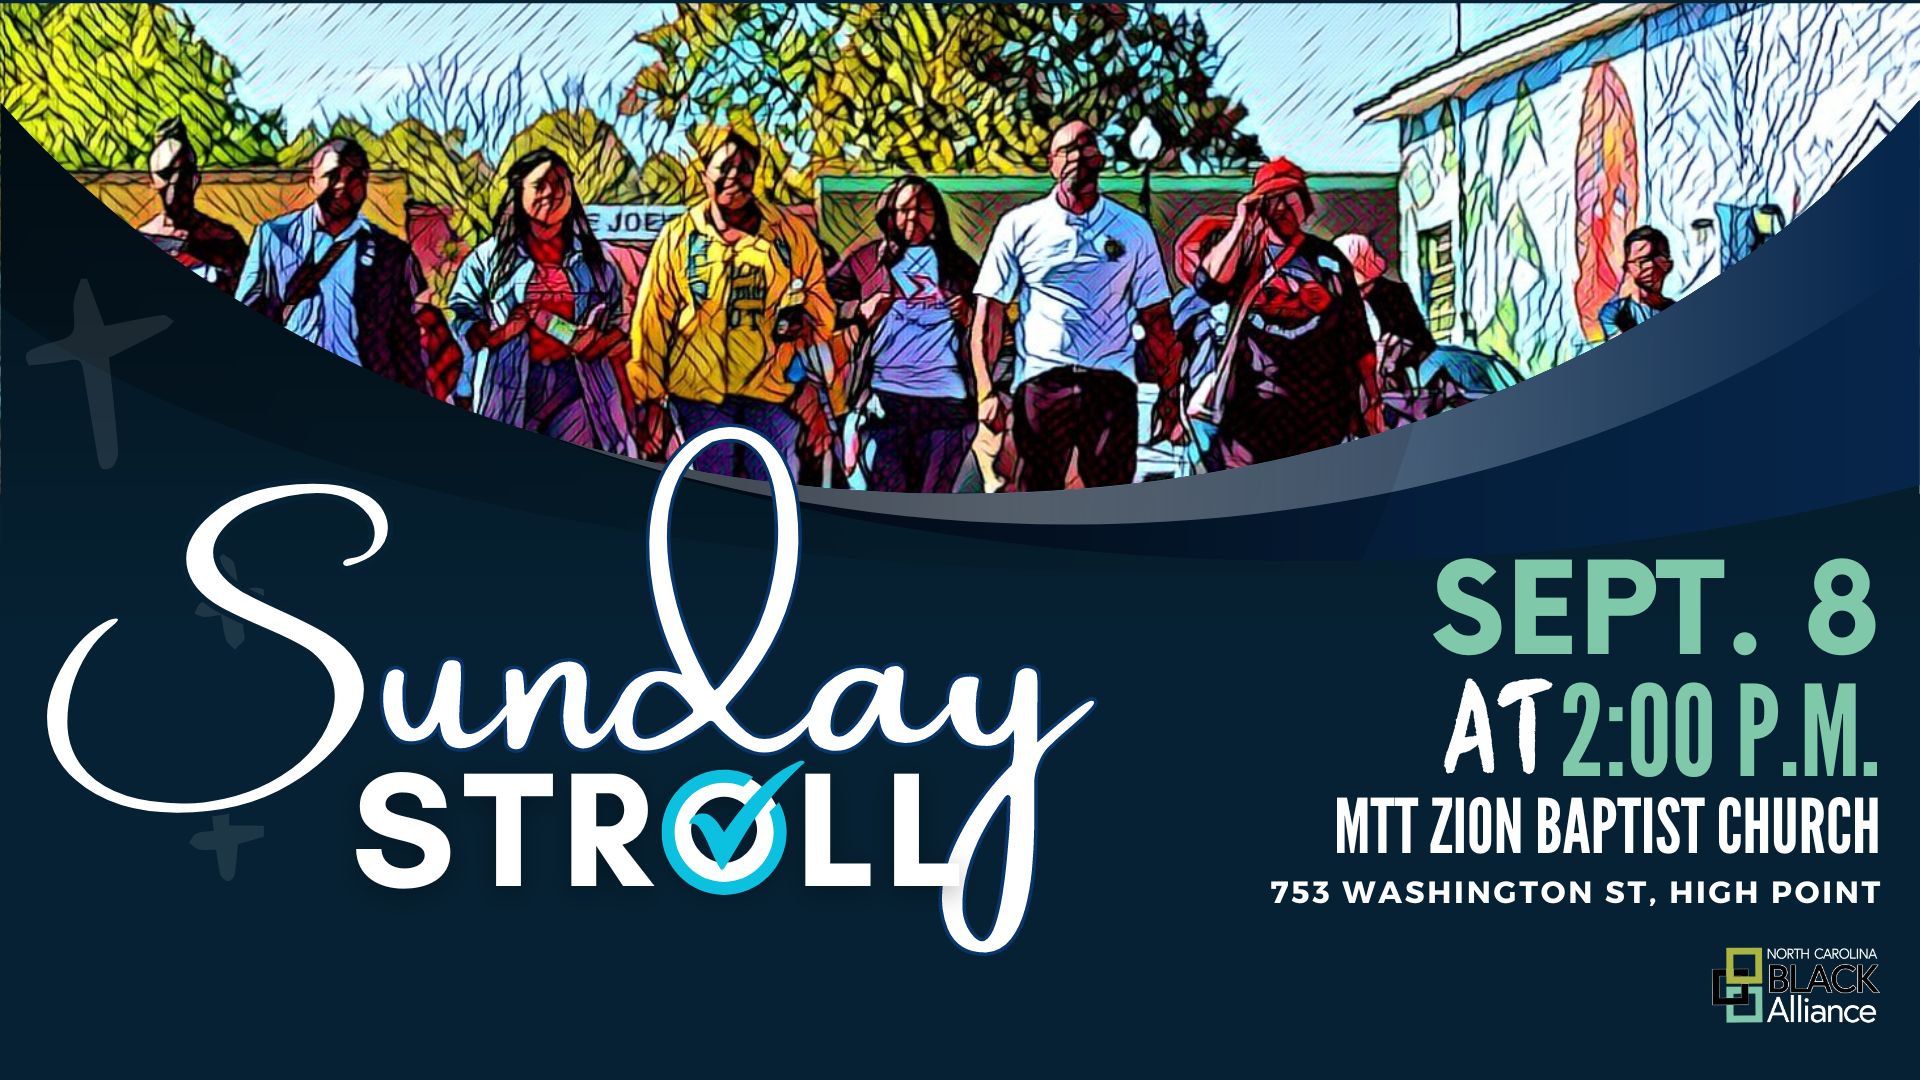 Sunday Stroll on September 8 at 2:00 pm in High Point